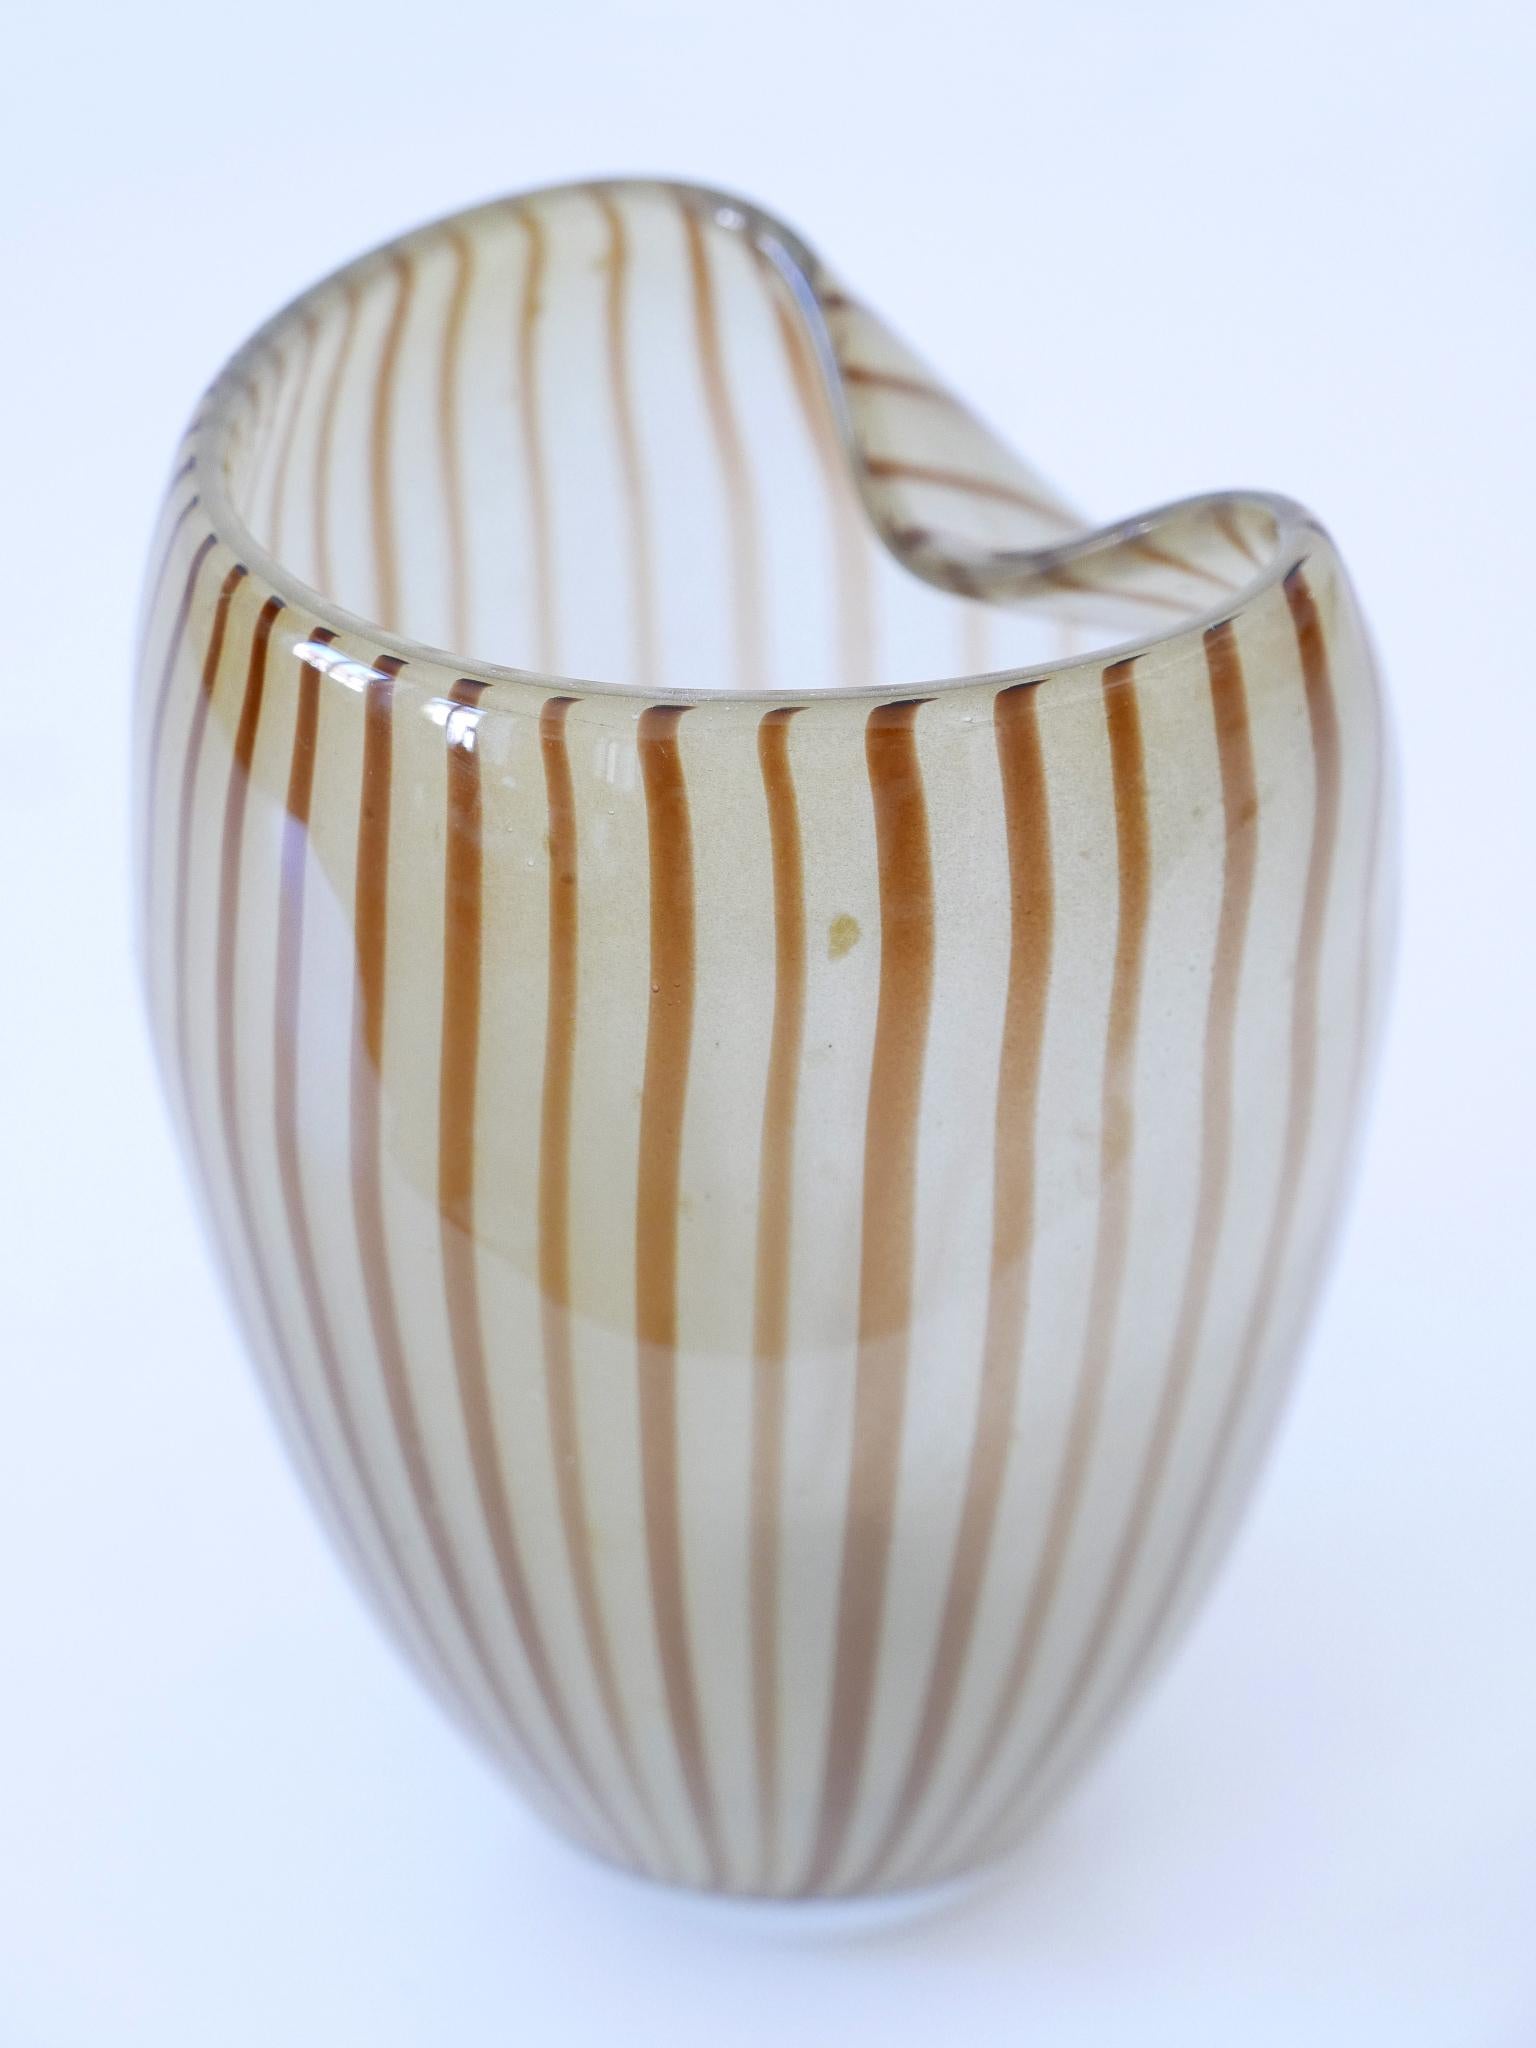 Decorative Mid Century Modern Murano Glass Vase Italy 1960s  For Sale 5